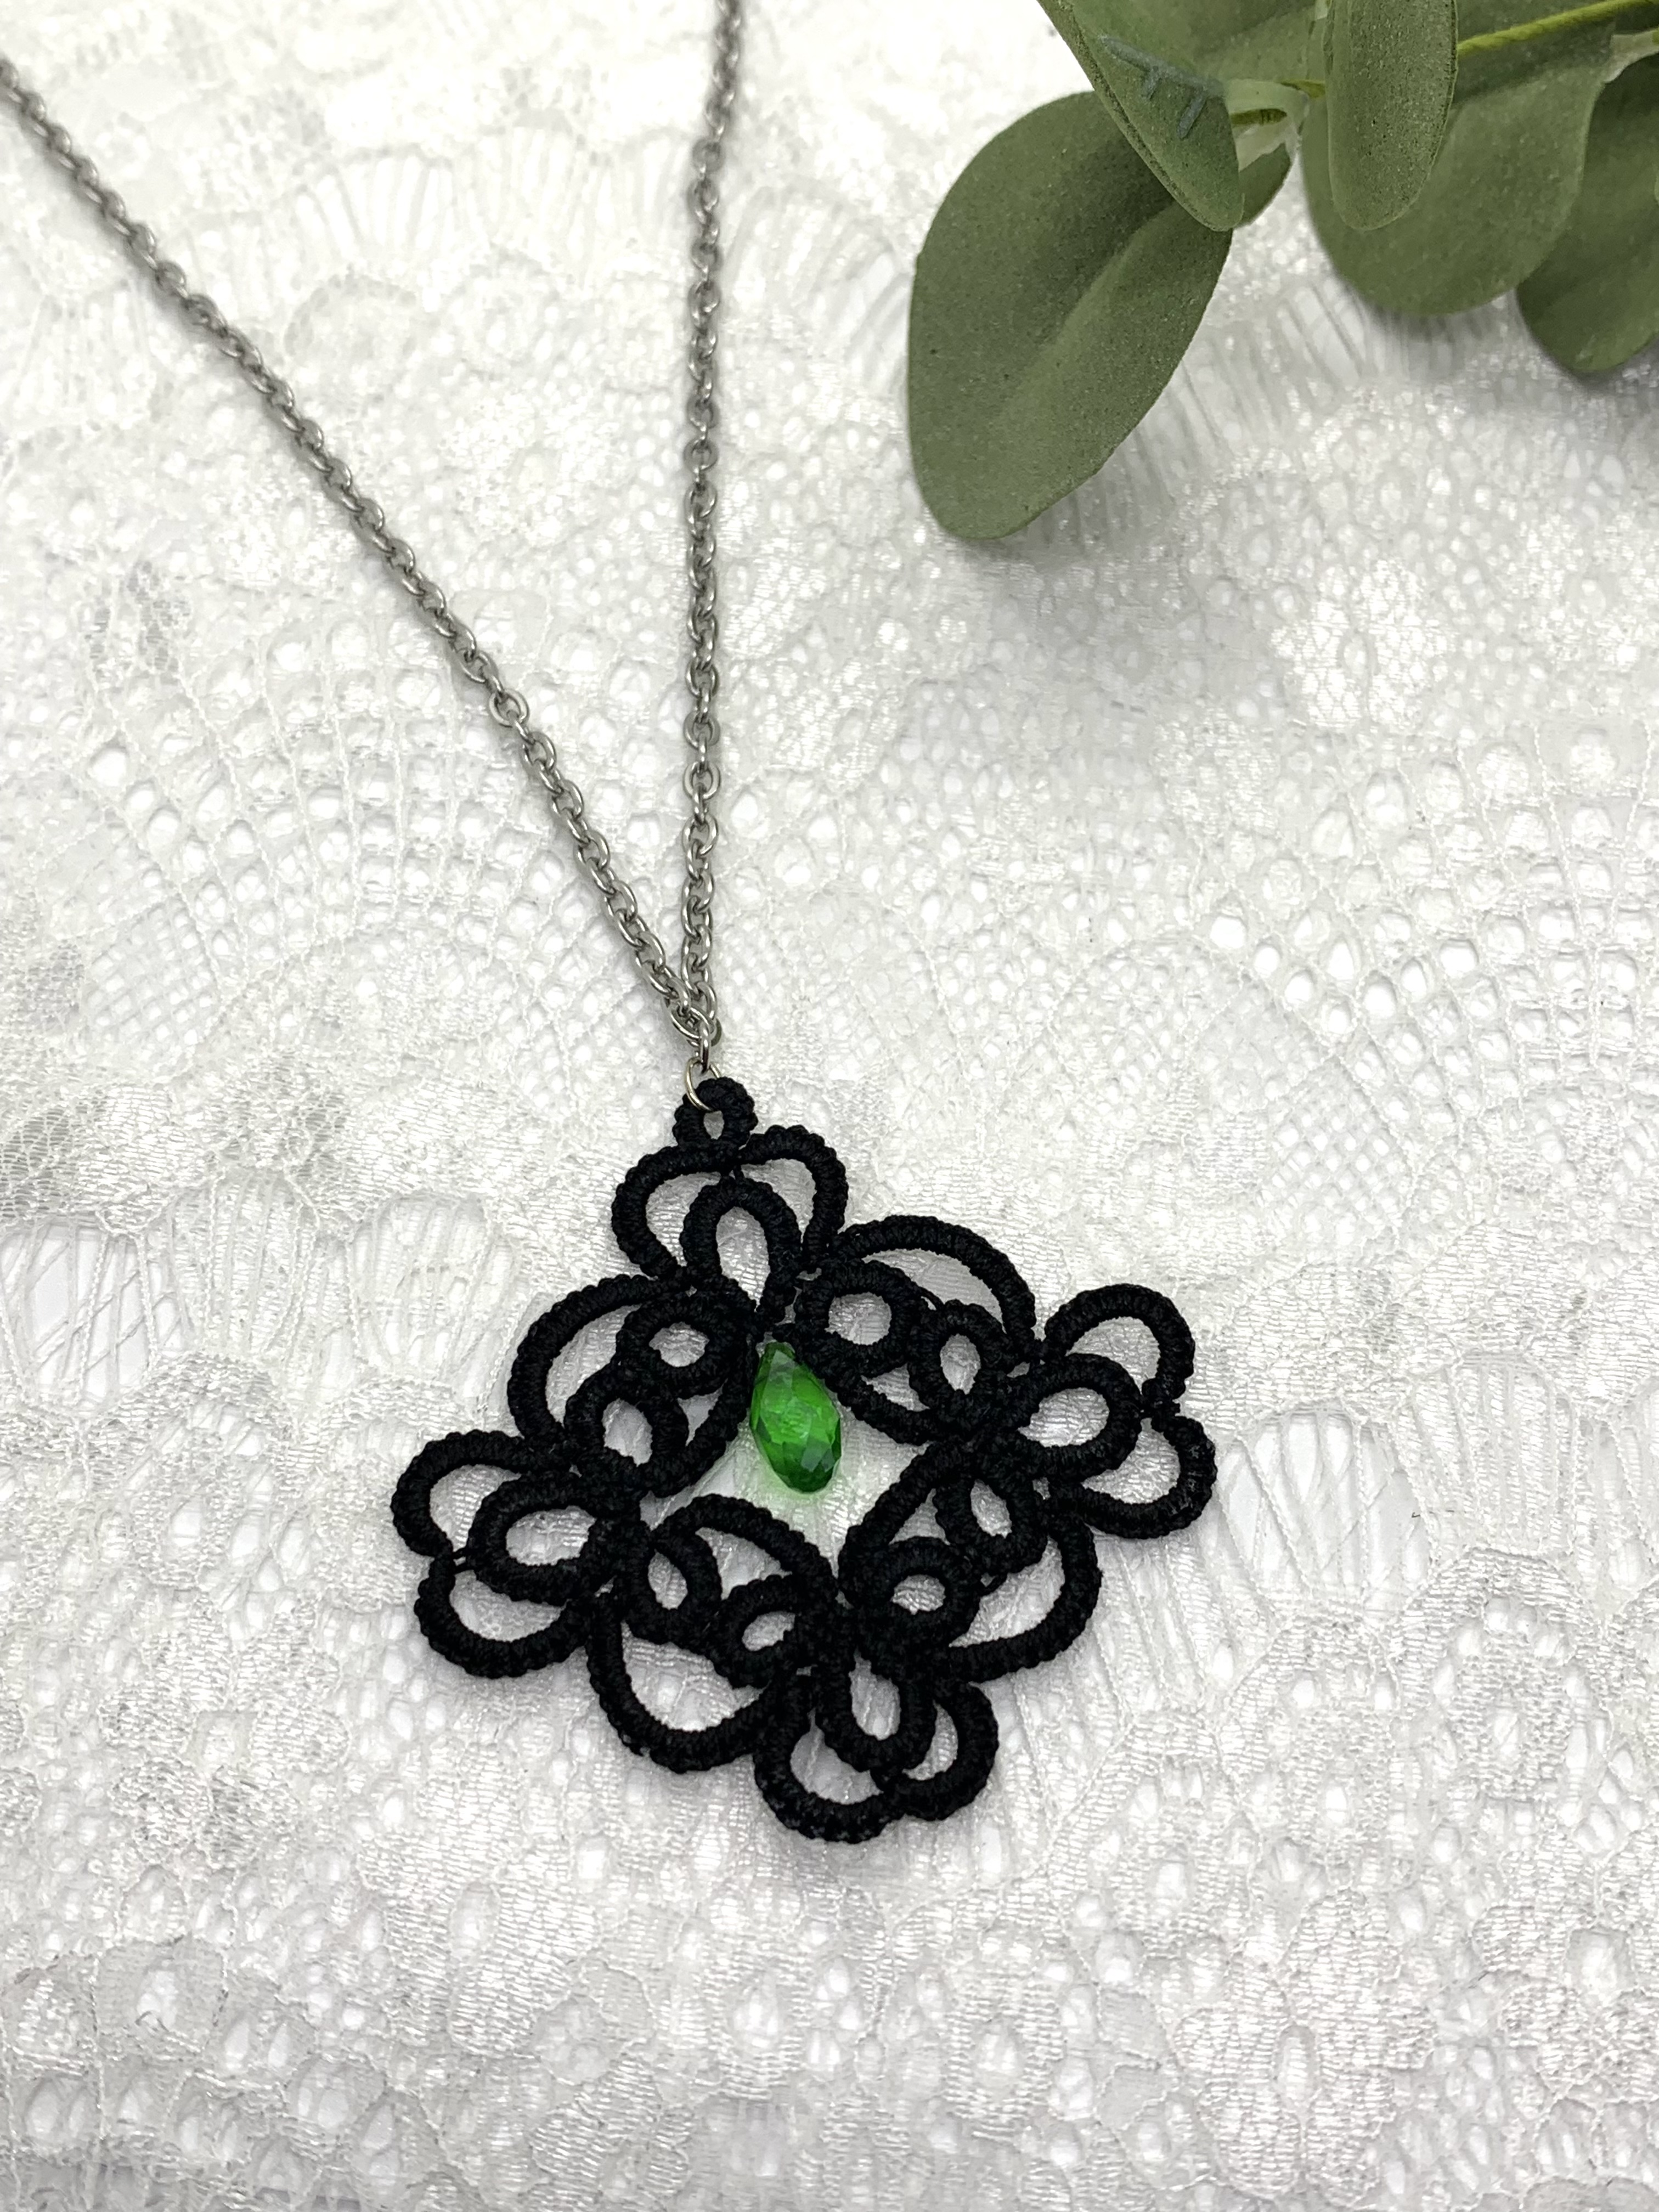 Black lace pendant with faceted green crystal